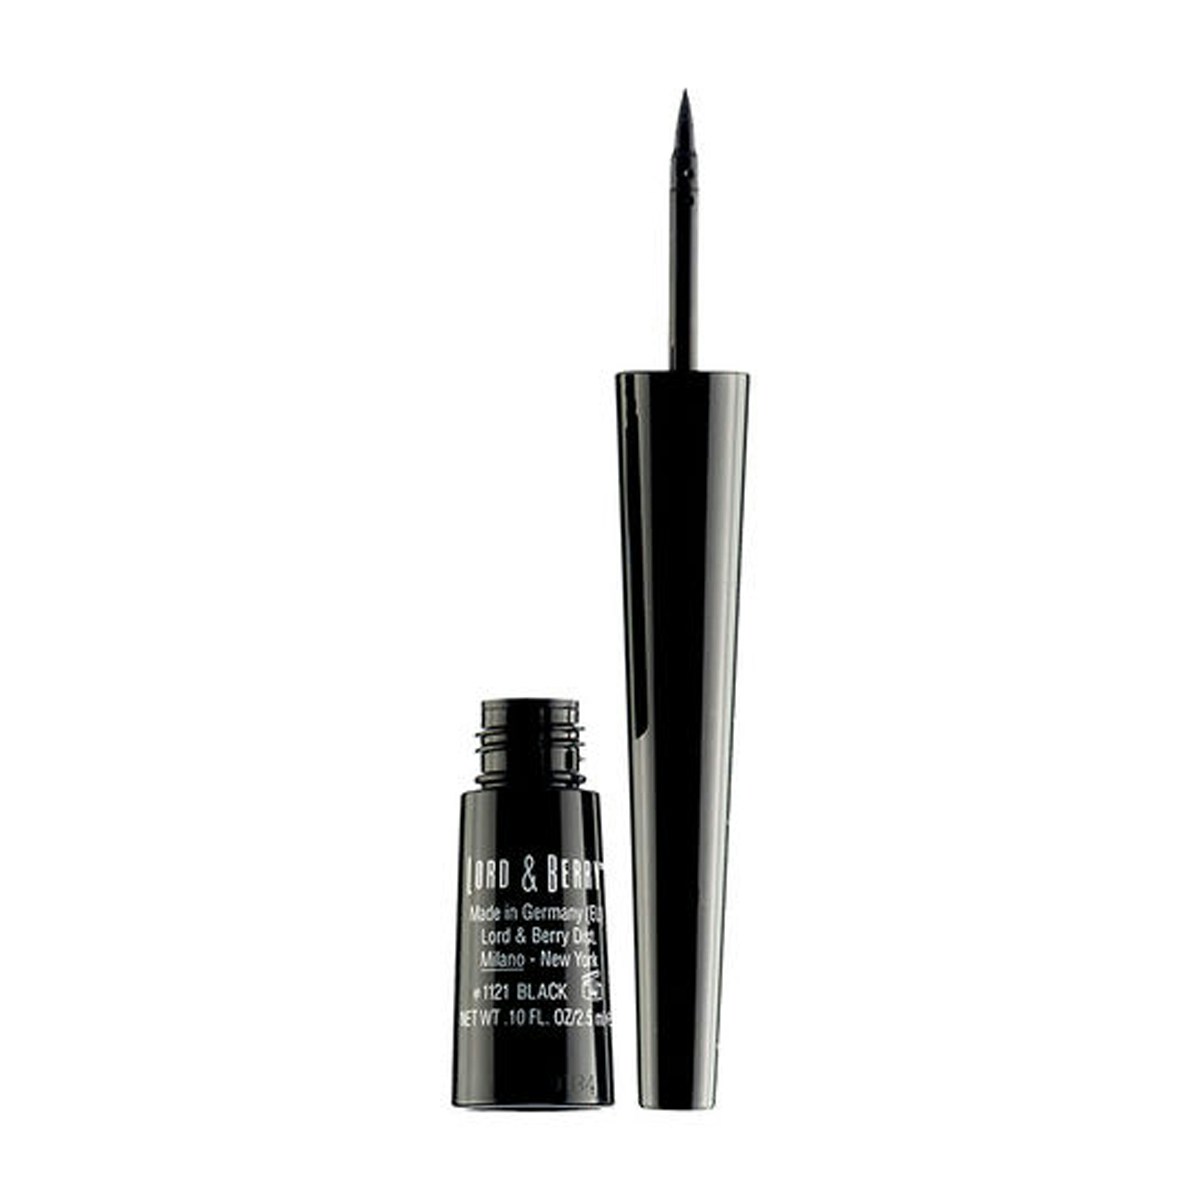 Lord & Berry Eyes Lord and Berry Black Wardrobe Inkglam Liquid Liner 2.5g Black